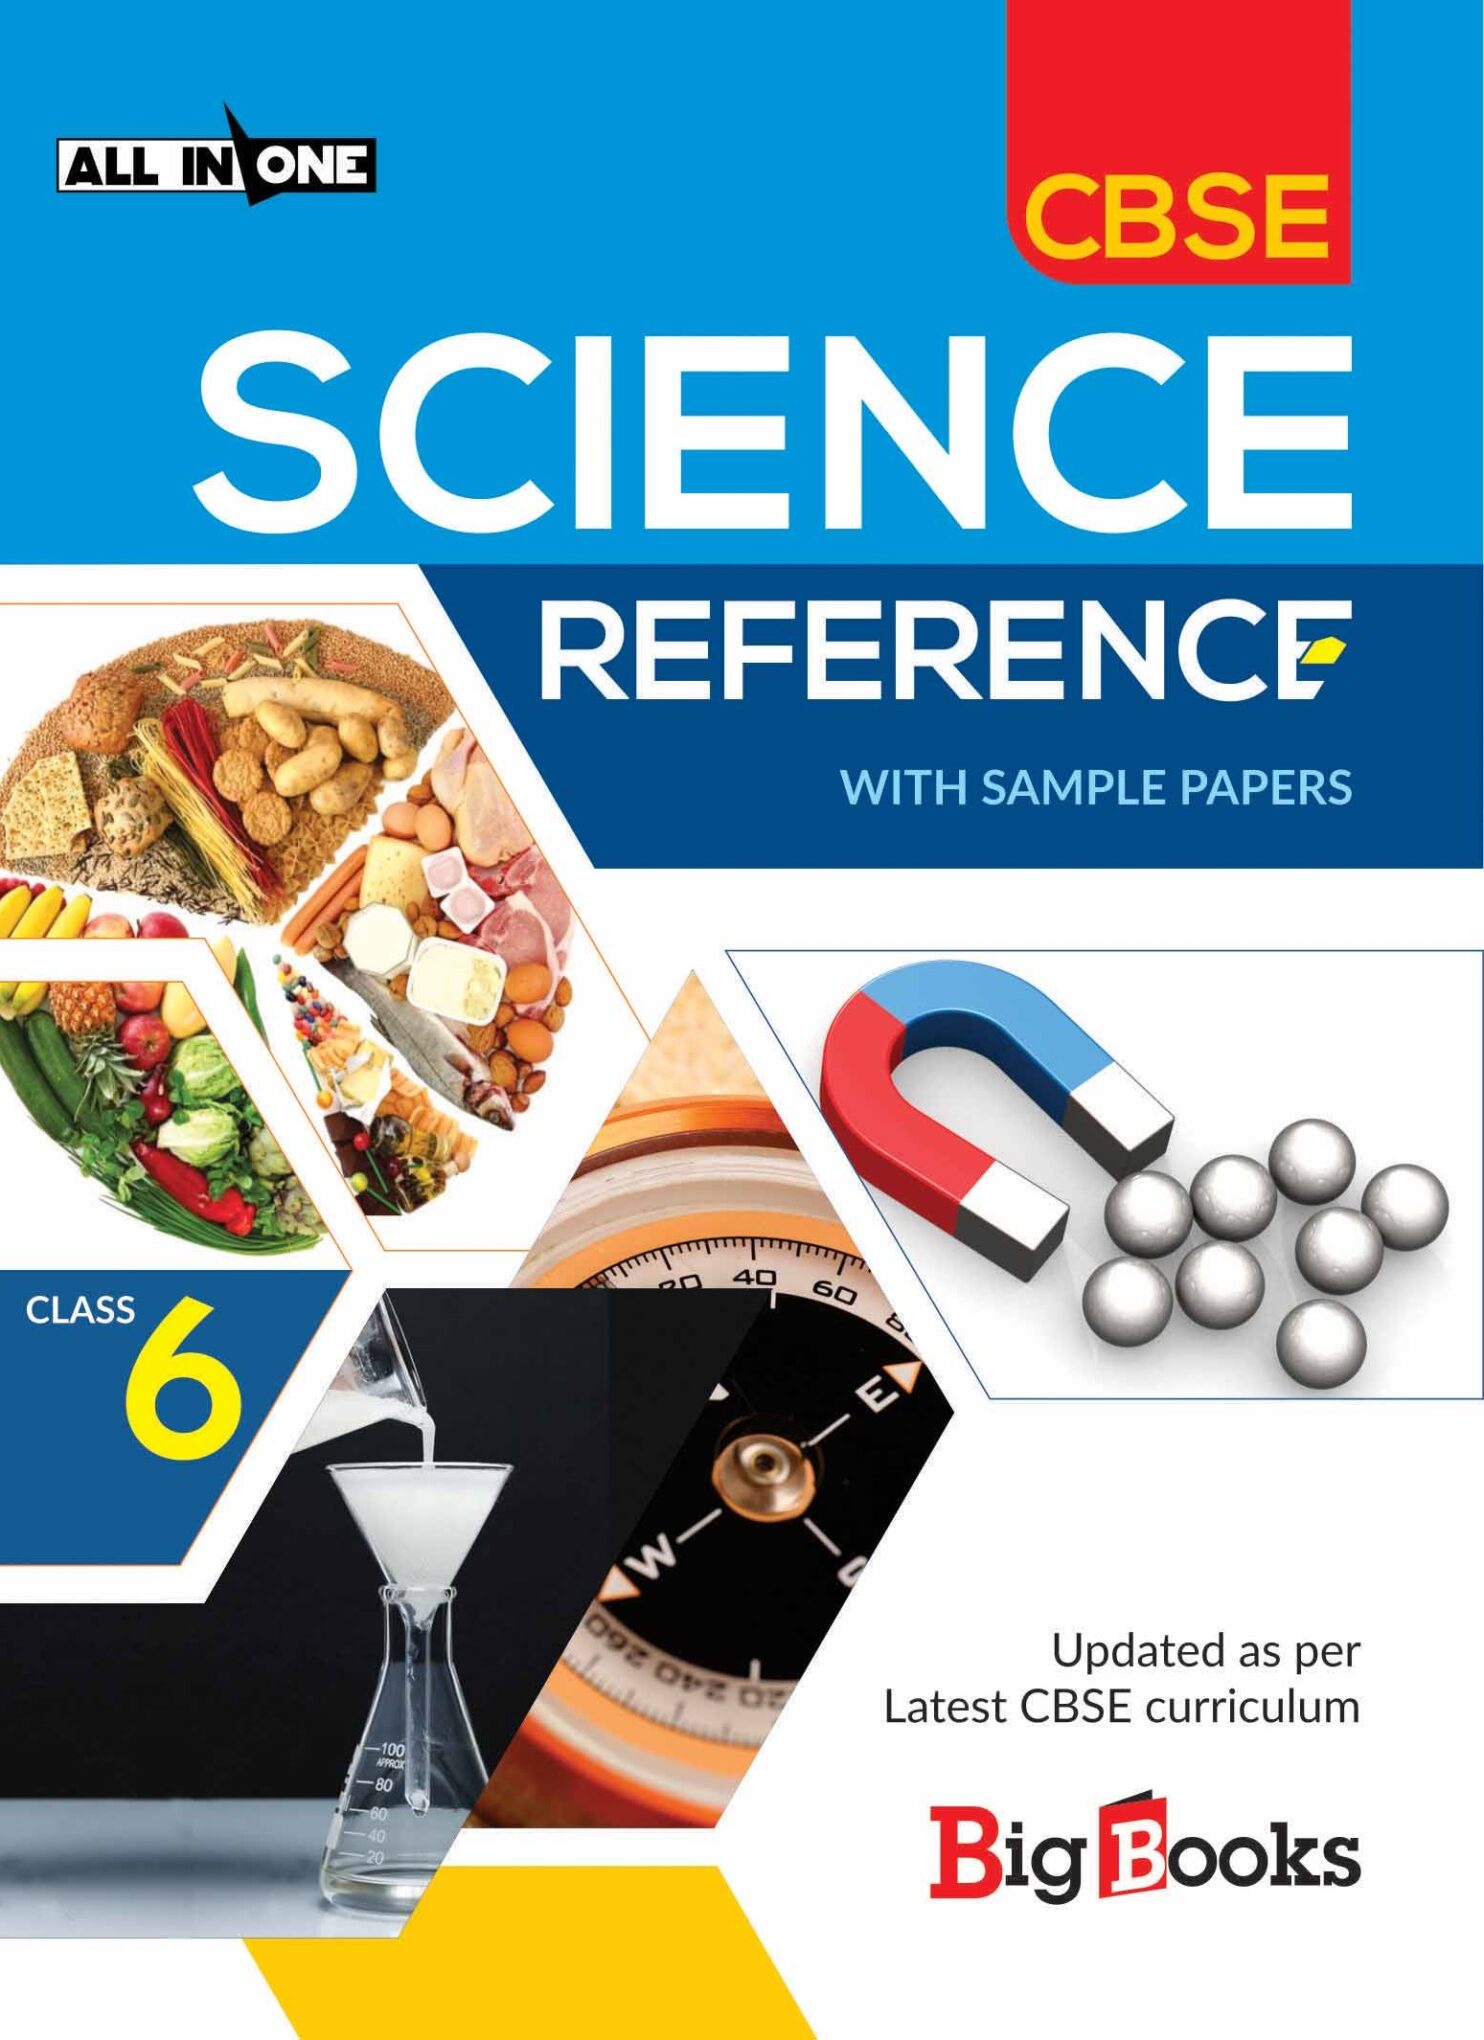 CBSE SCIENCE REFERENCE FOR CLASS 6